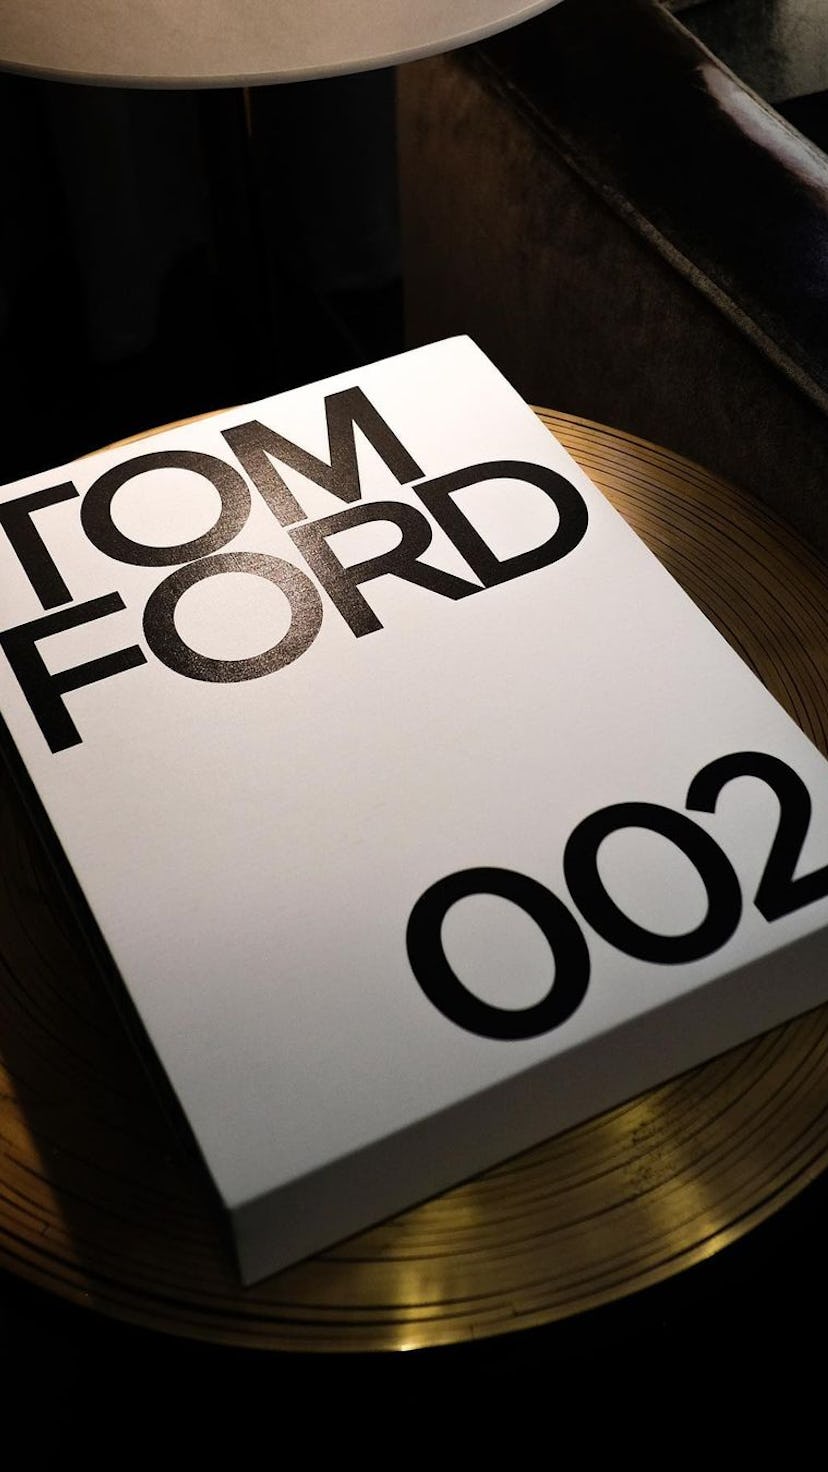 The cover of the 'Tom Ford 002' fashion book